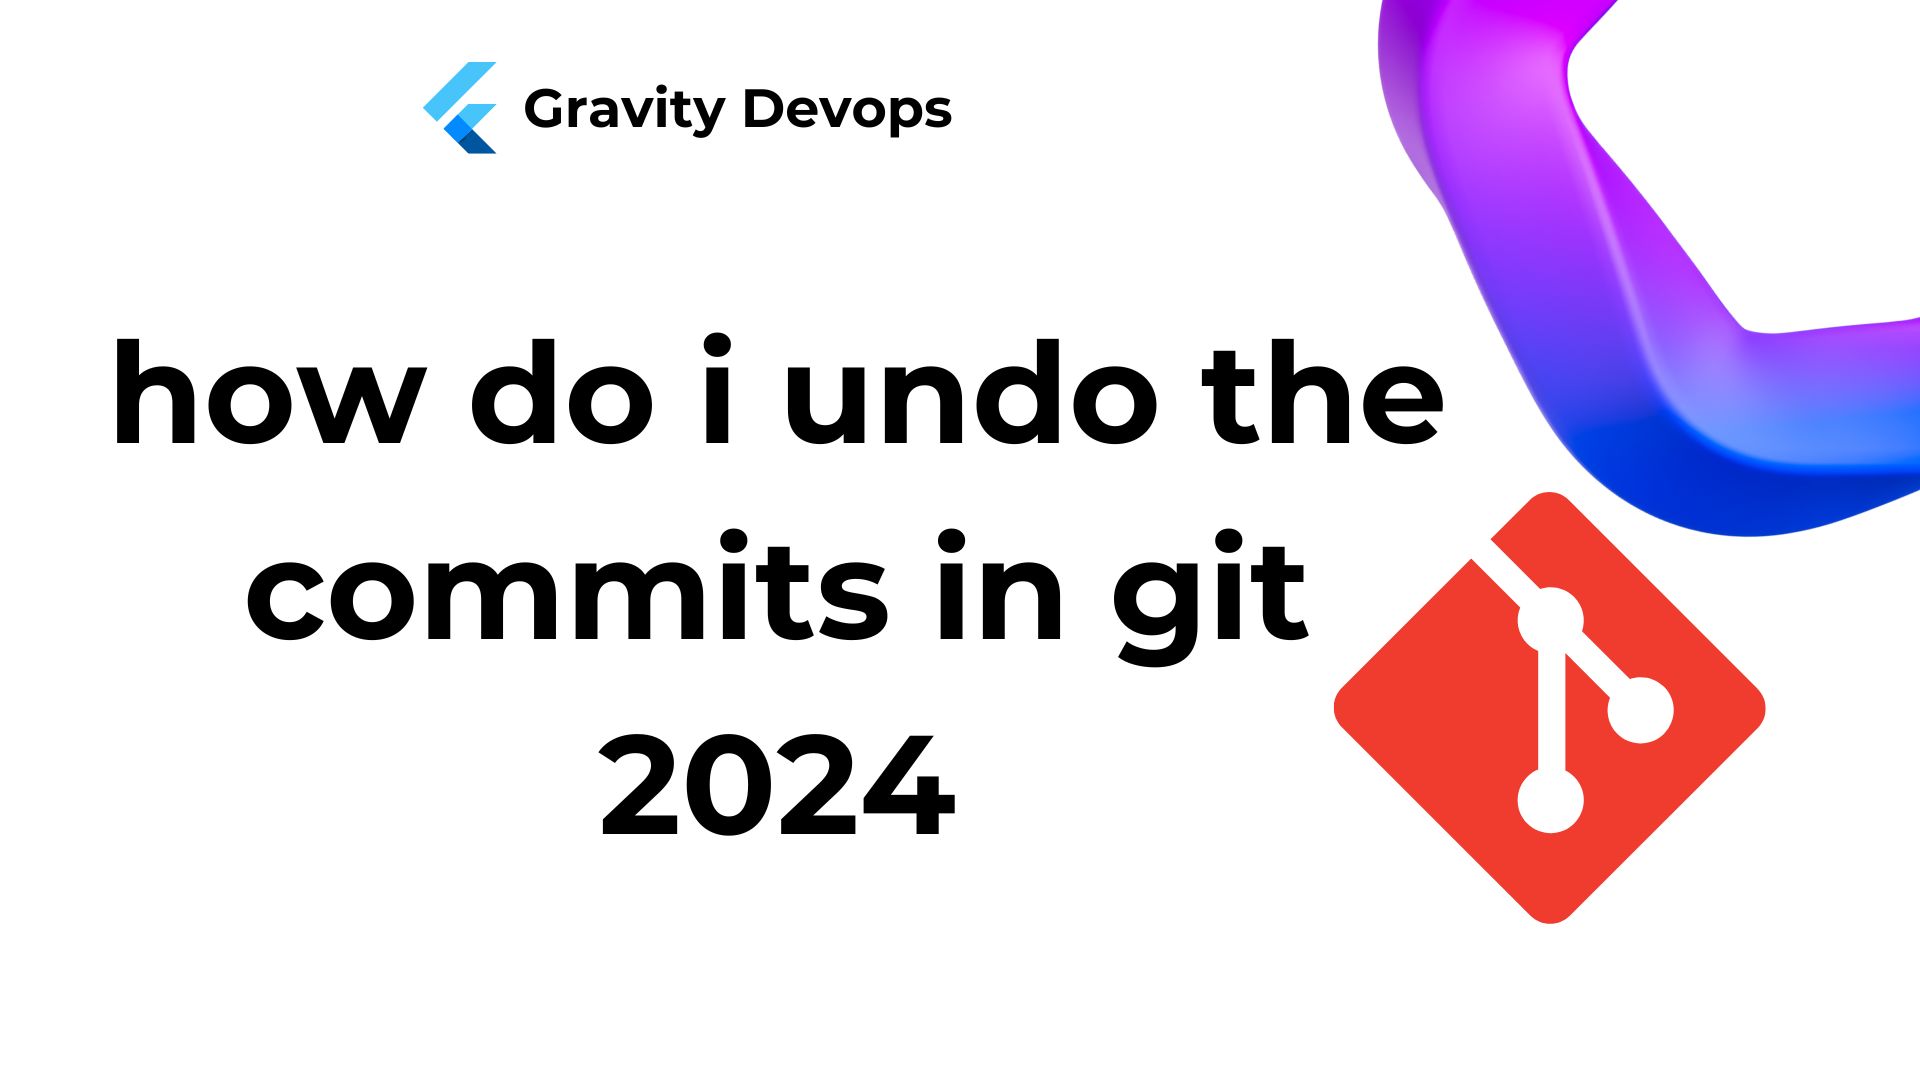 how do i undo the commits in git 2024